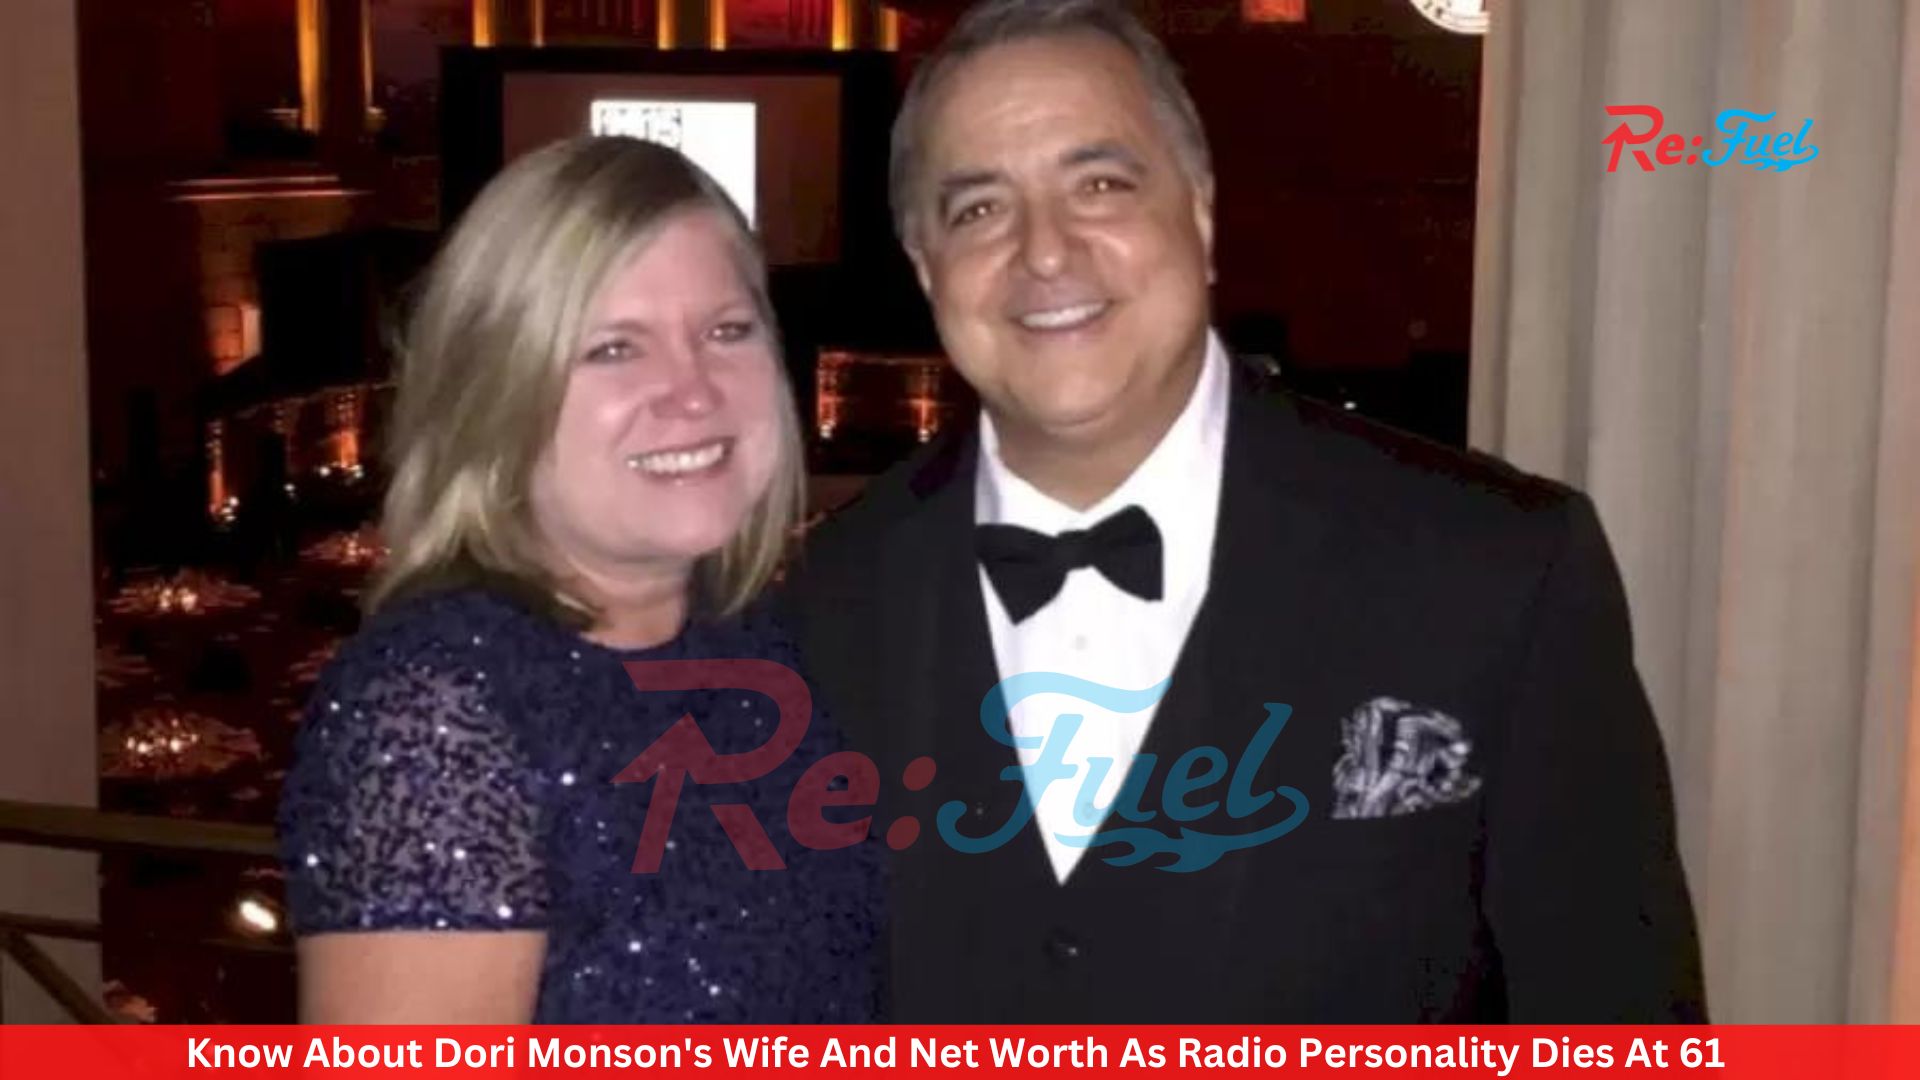 Know About Dori Monson's Wife And Net Worth As Radio Personality Dies At 61